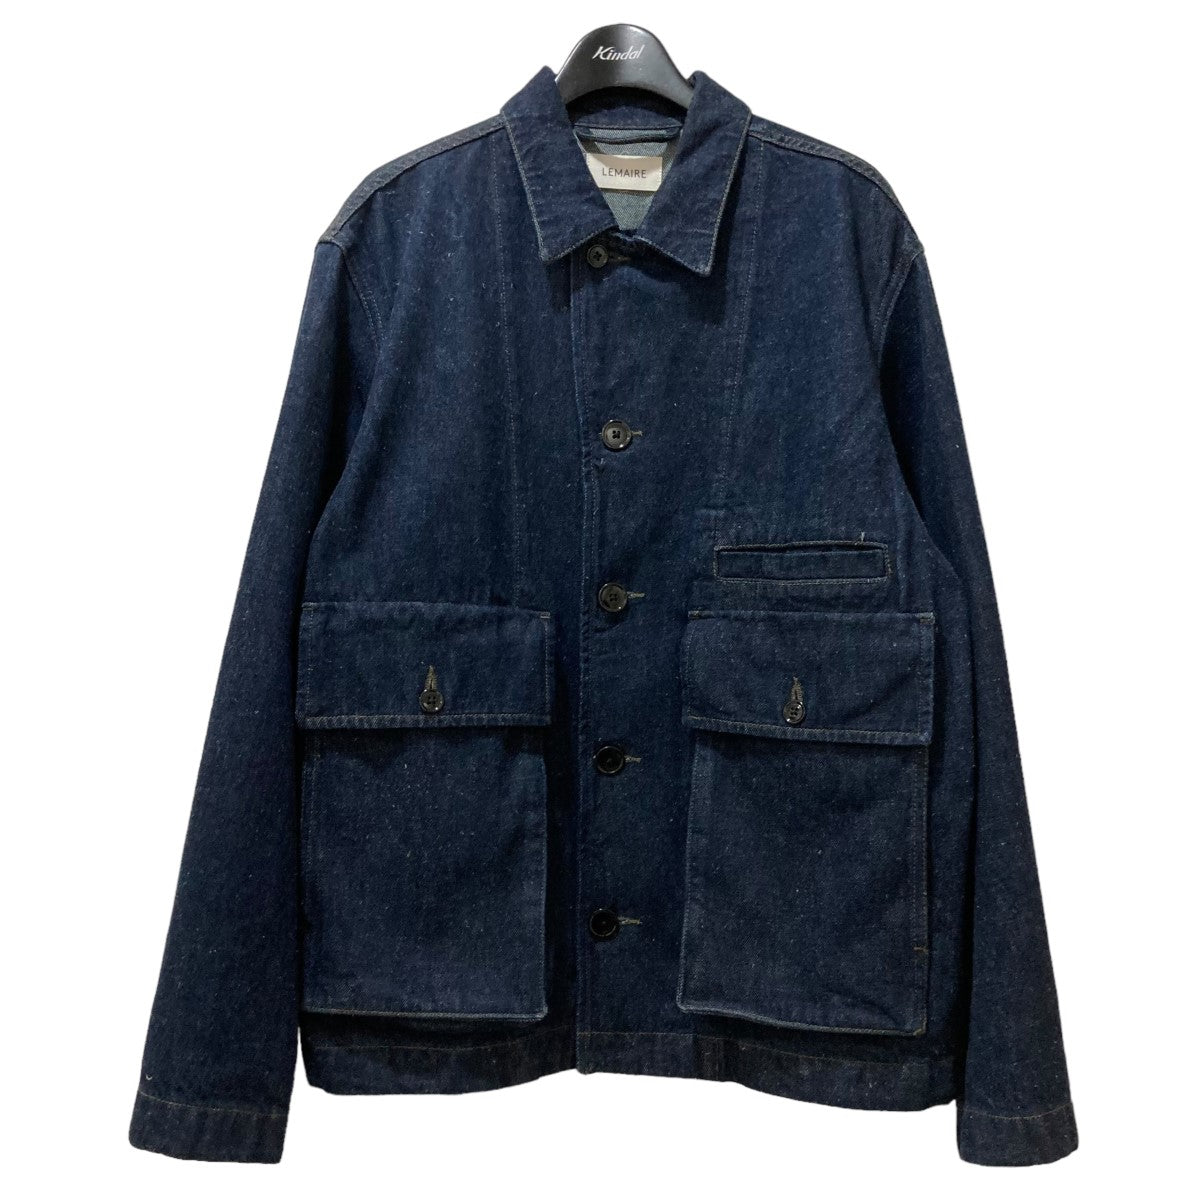 LEMAIRE(ルメール) 23SS「MILITARY OVERSHIRT」ジャケット 